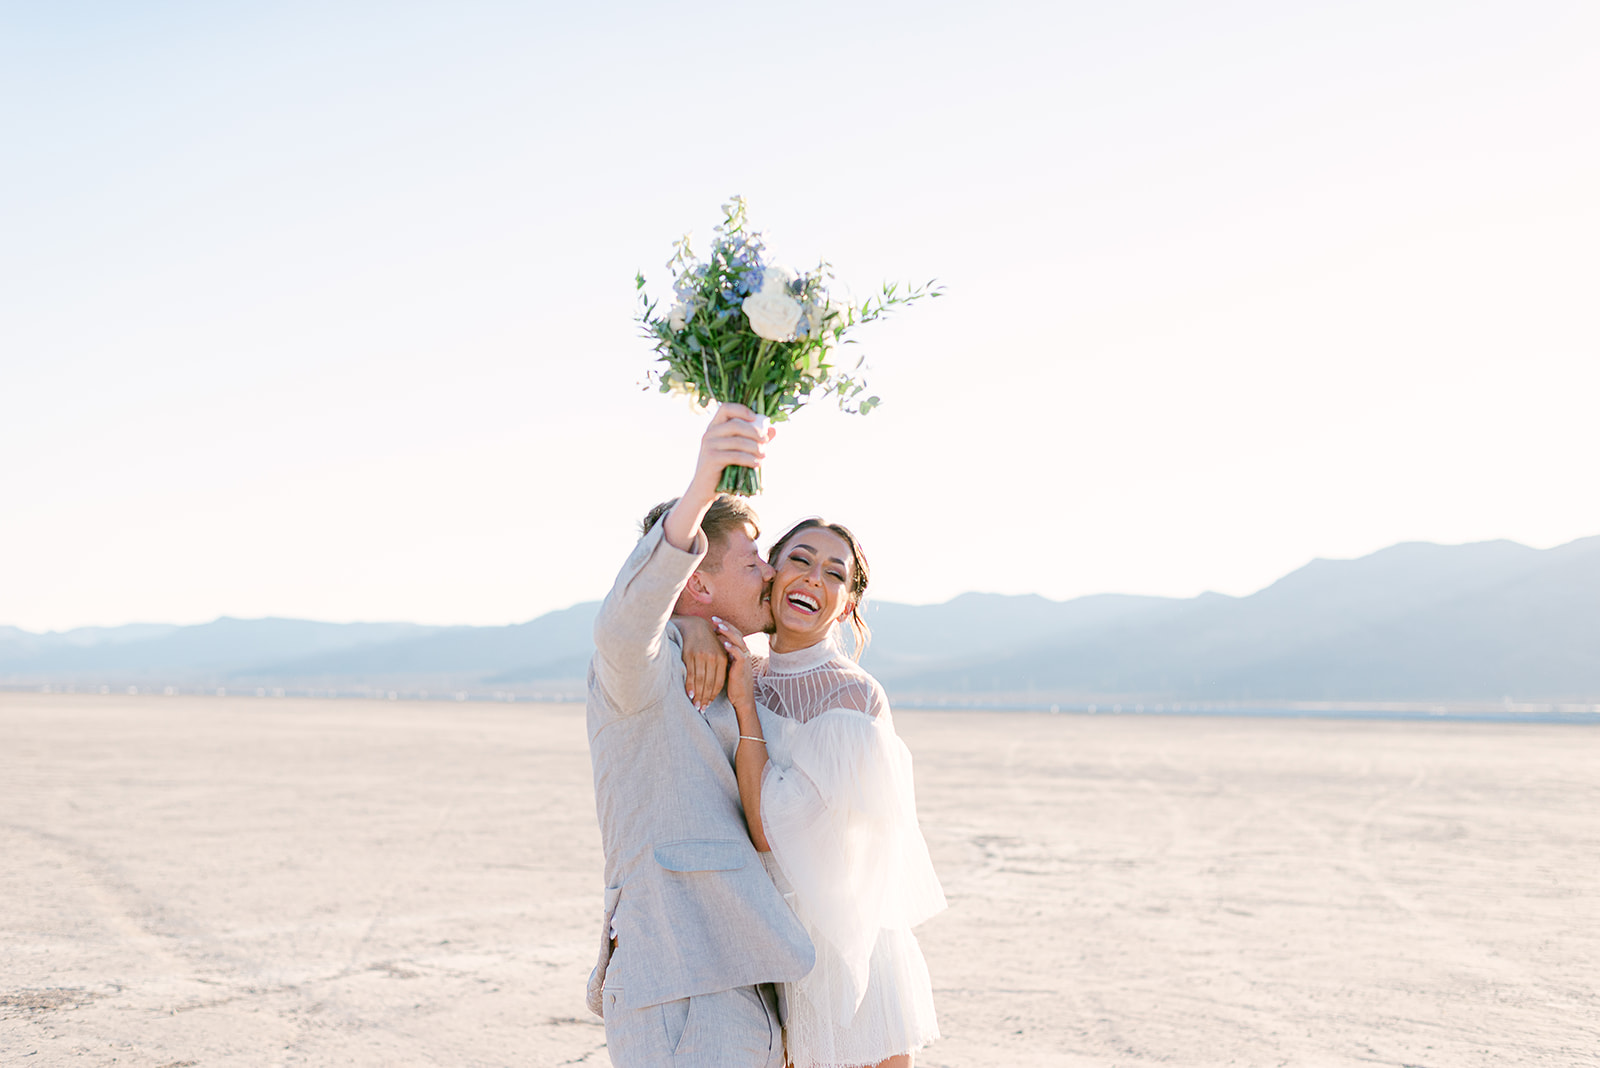 Dry Lake Bed Wedding & Elopement Guide. Bride and groom sharing an embrace during their elopement shoot.